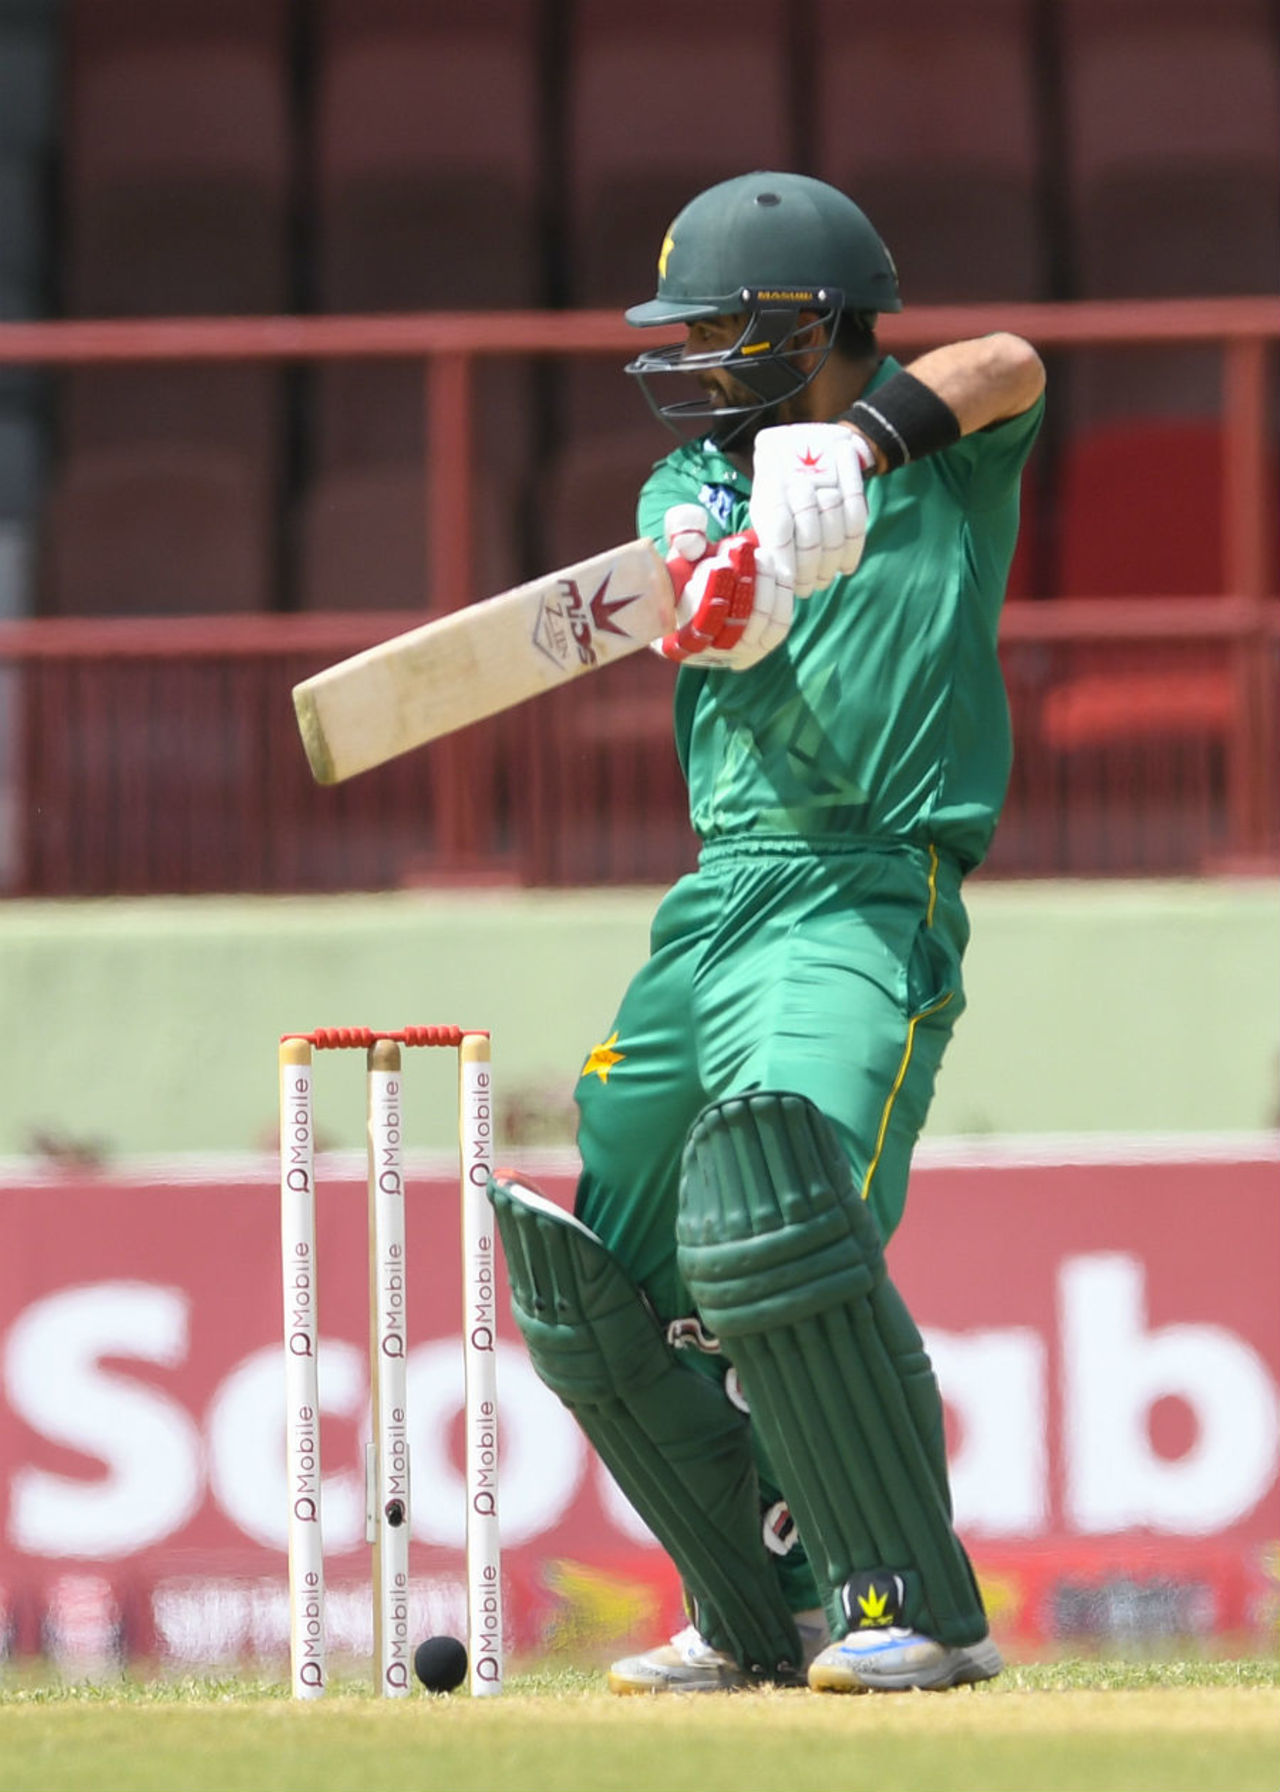 Ahmed Shehzad bats during the second ODI in Providence, West Indies v Pakistan, 2nd ODI, Providence, April 9, 2017